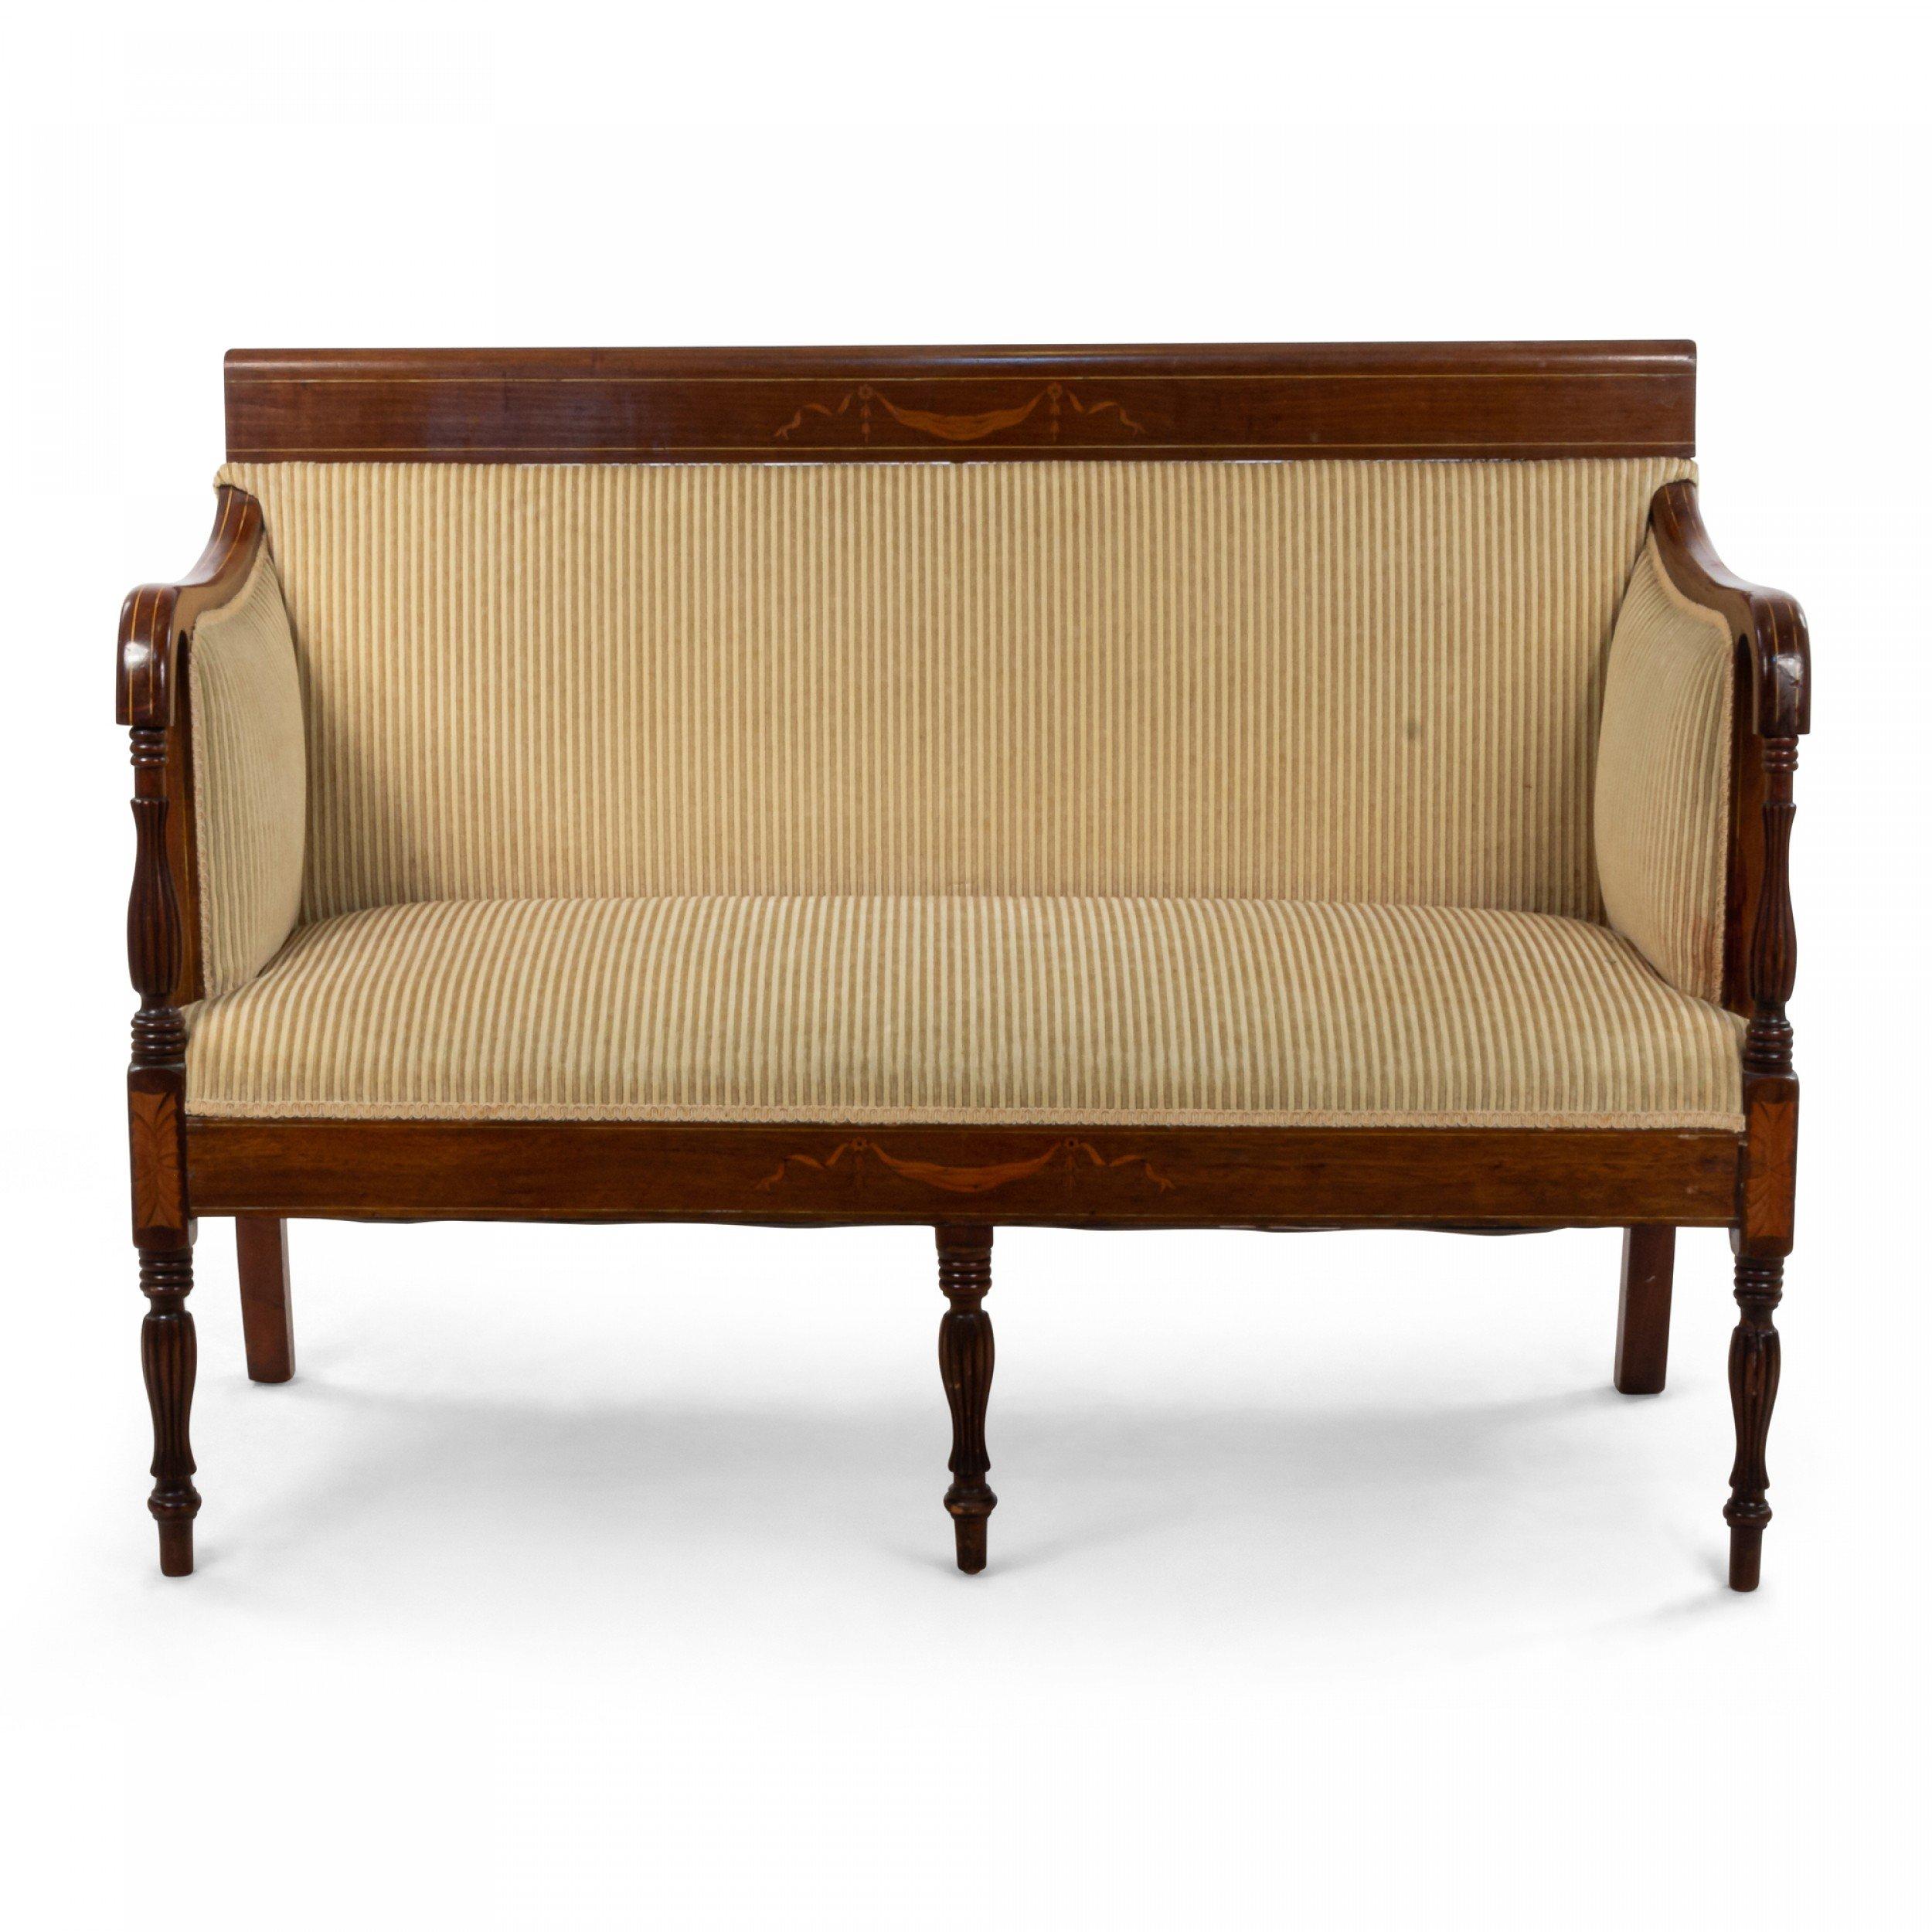 English Georgian Chippendale style (mid-20th century) camel back yellow damask sofa without scrolled arms and a mahogany frame with six lattice carved legs.